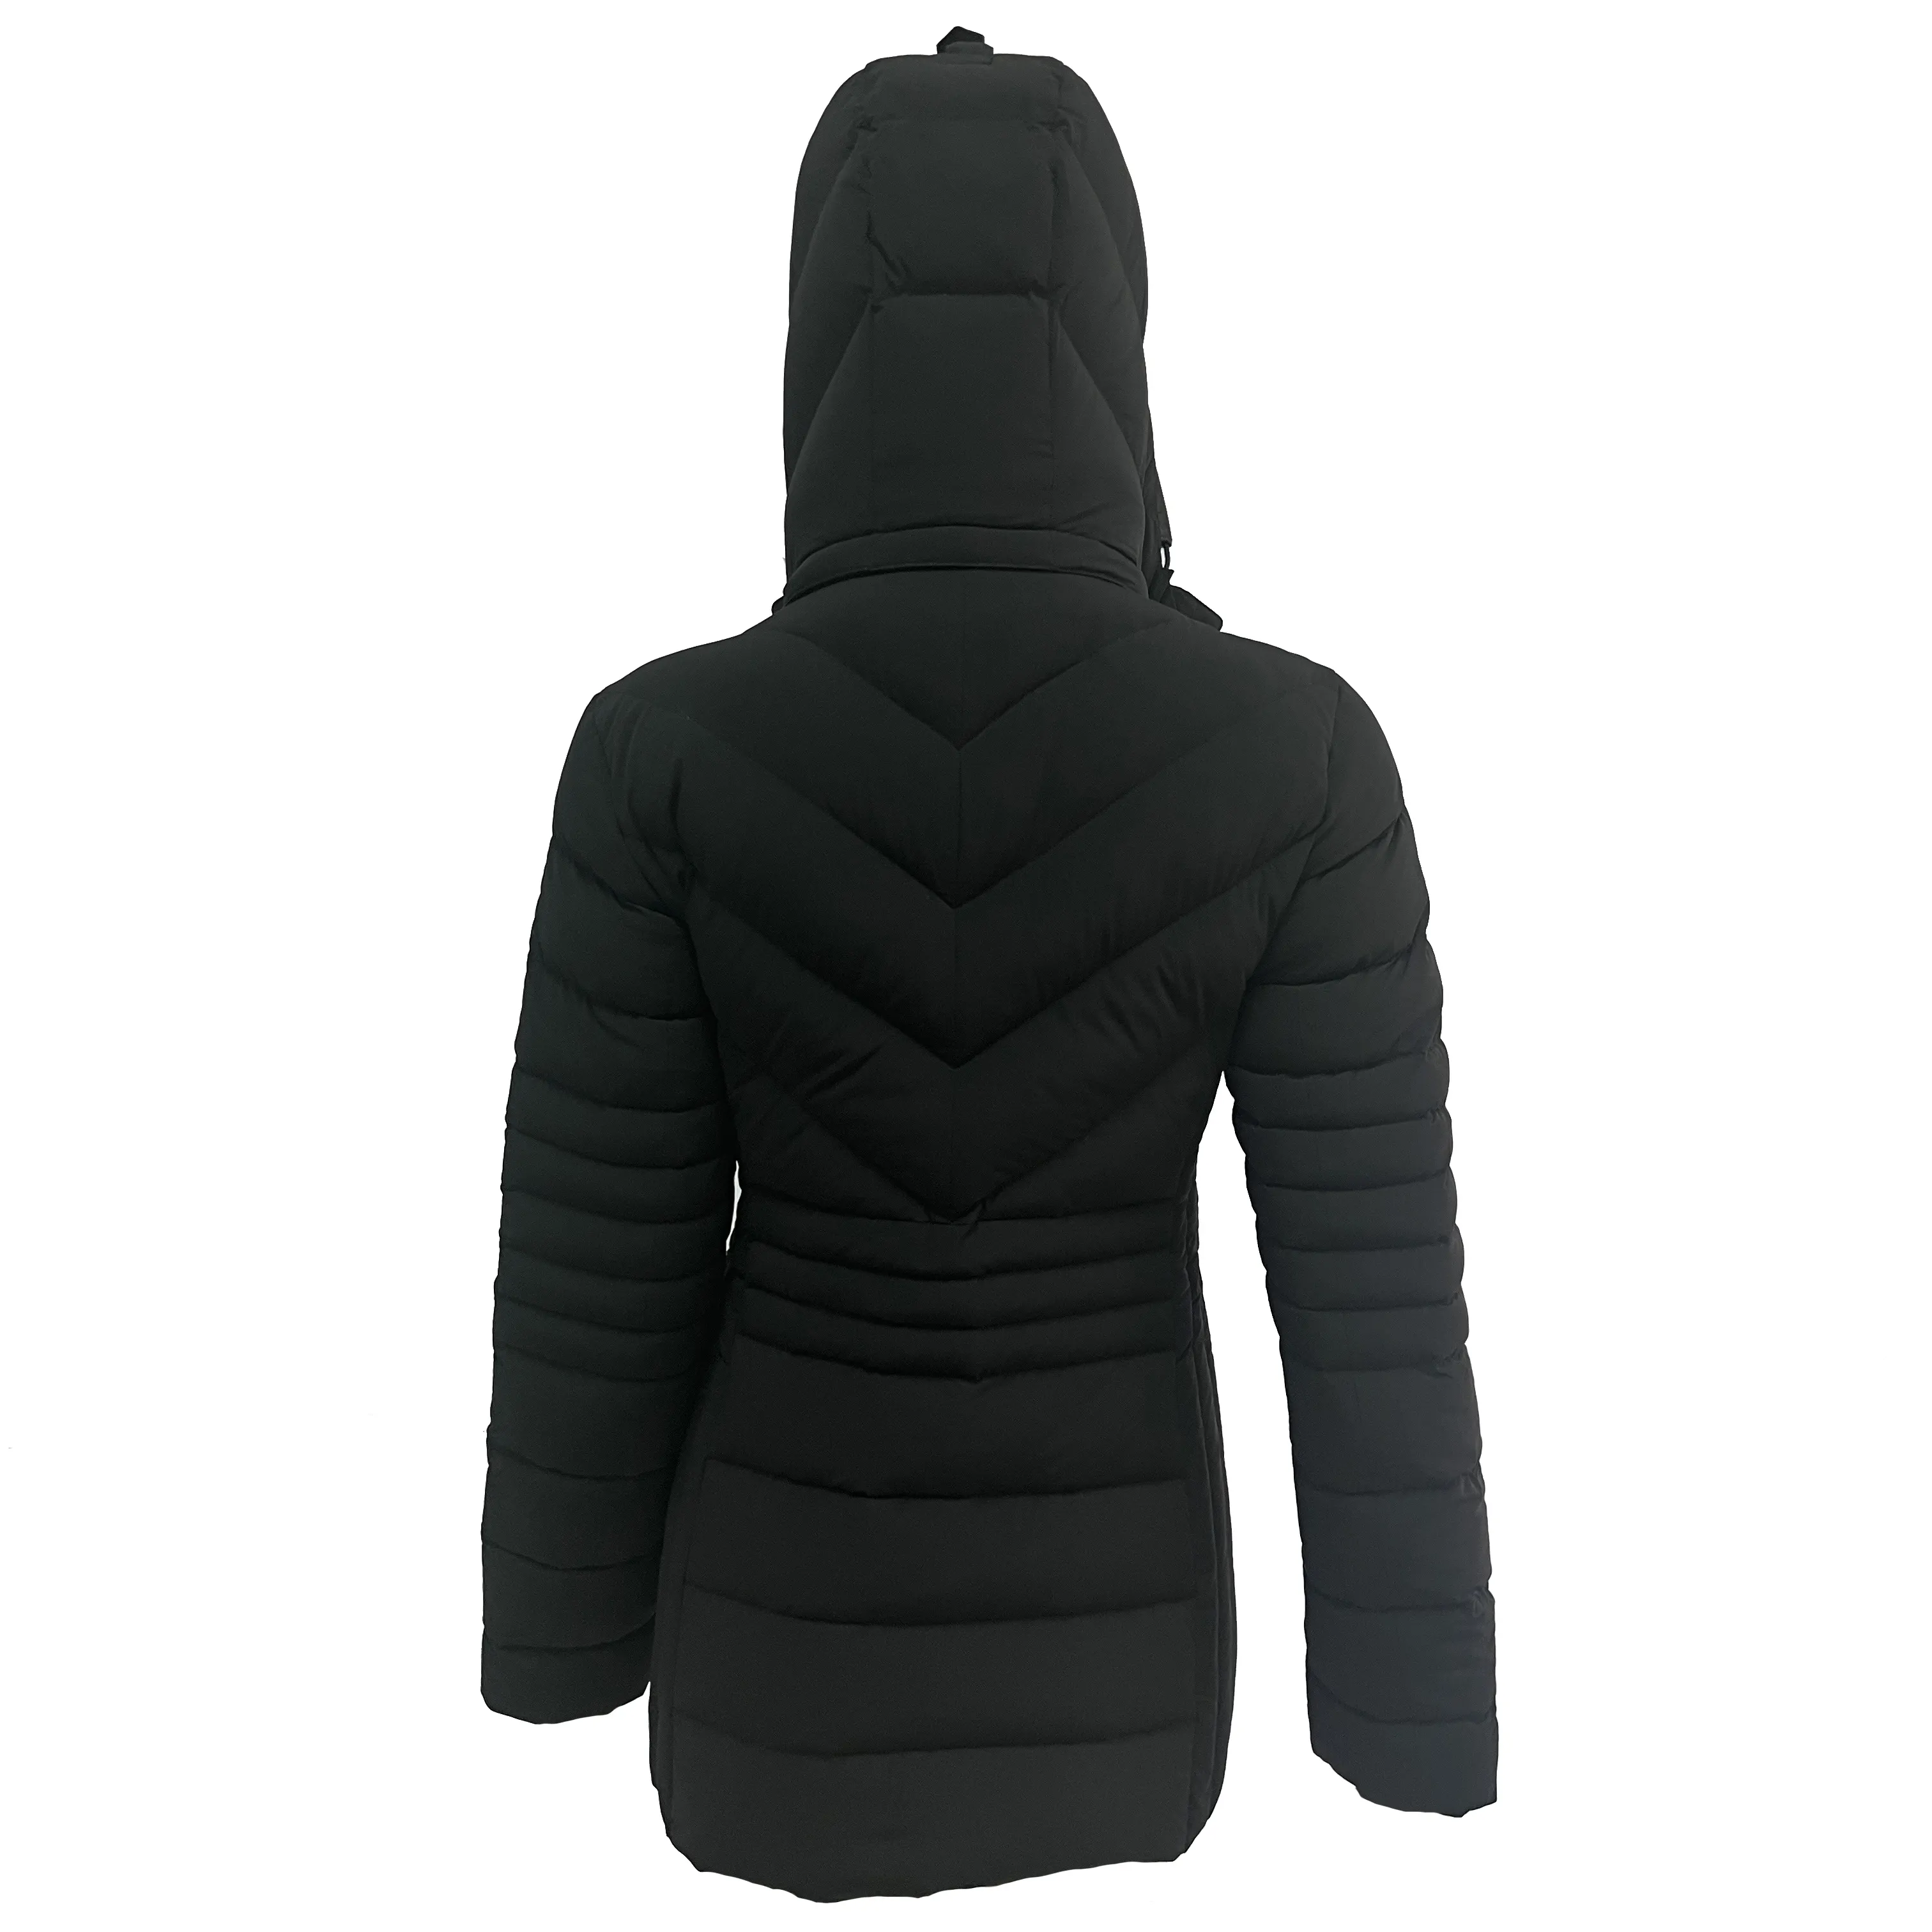 Removeable Hooded Dames Jas Winter Down Jacket Goose Vrouwen Down Jassen